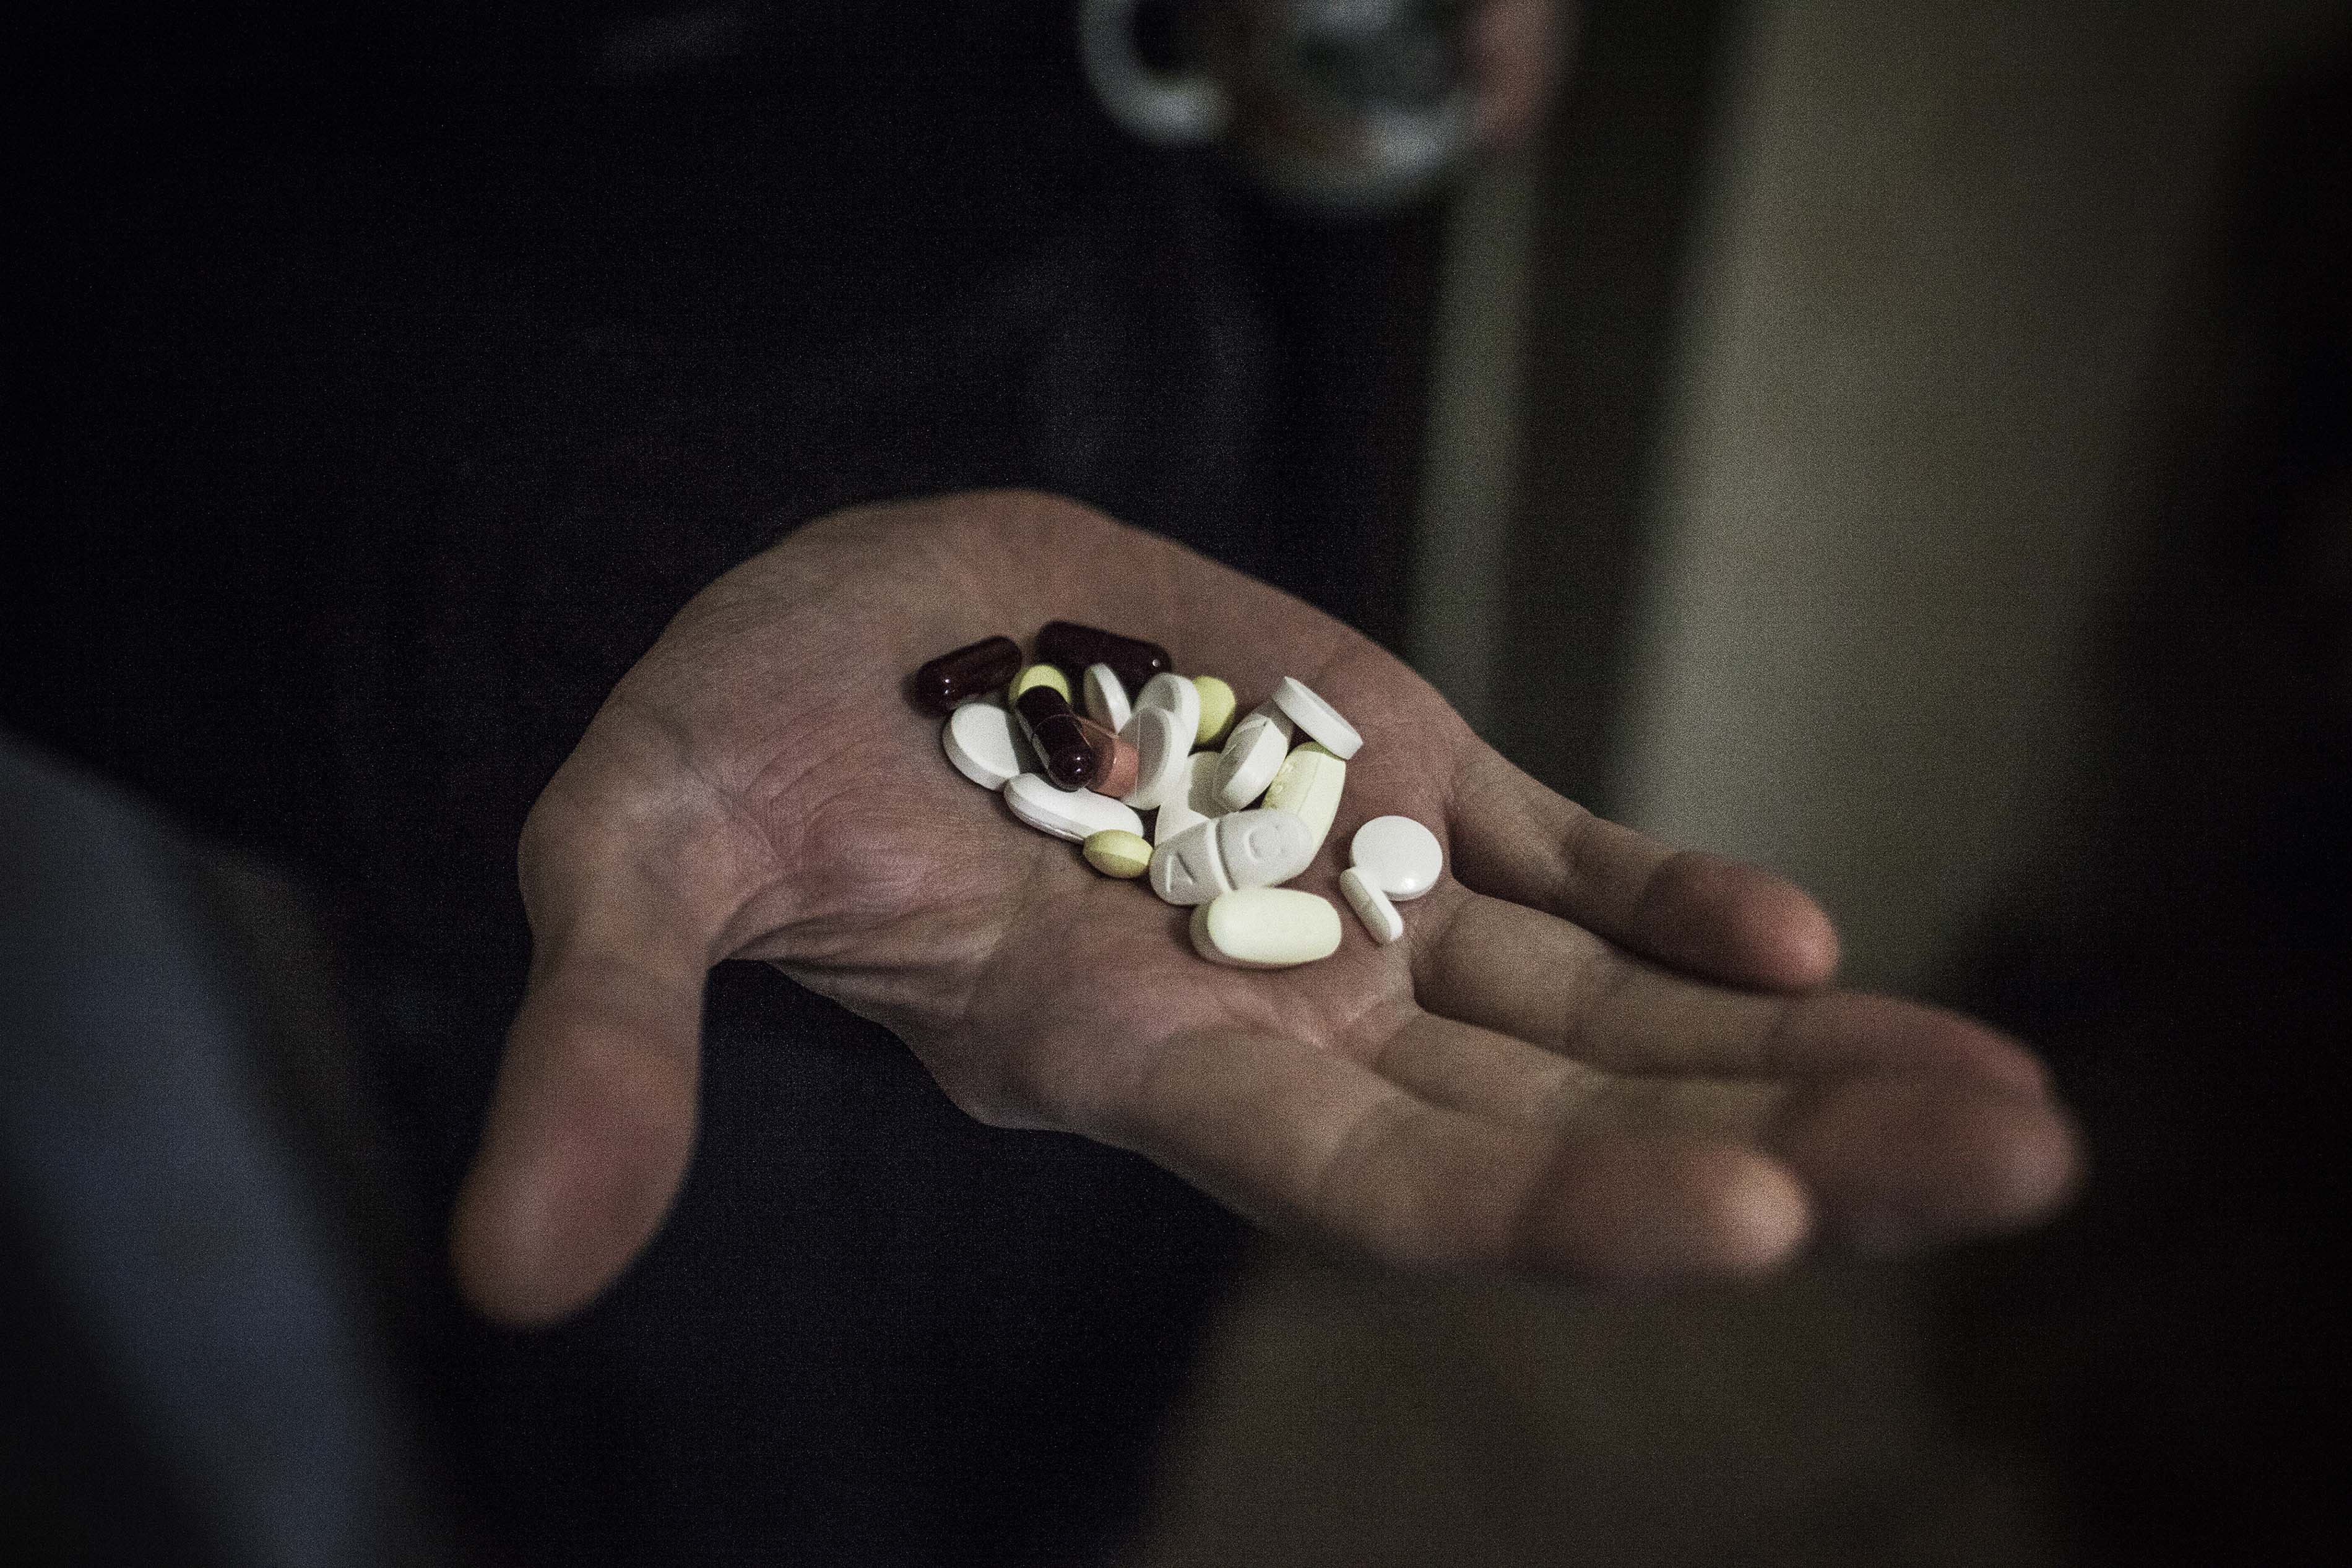 A patient with TB shows the pills for his treatment in a prison in Donetsk, Ukraine, where MSF is helping to treat patients infected with TB. MSF has been running a TB treatment program within the penitentiary system in Donetsk since 2011.